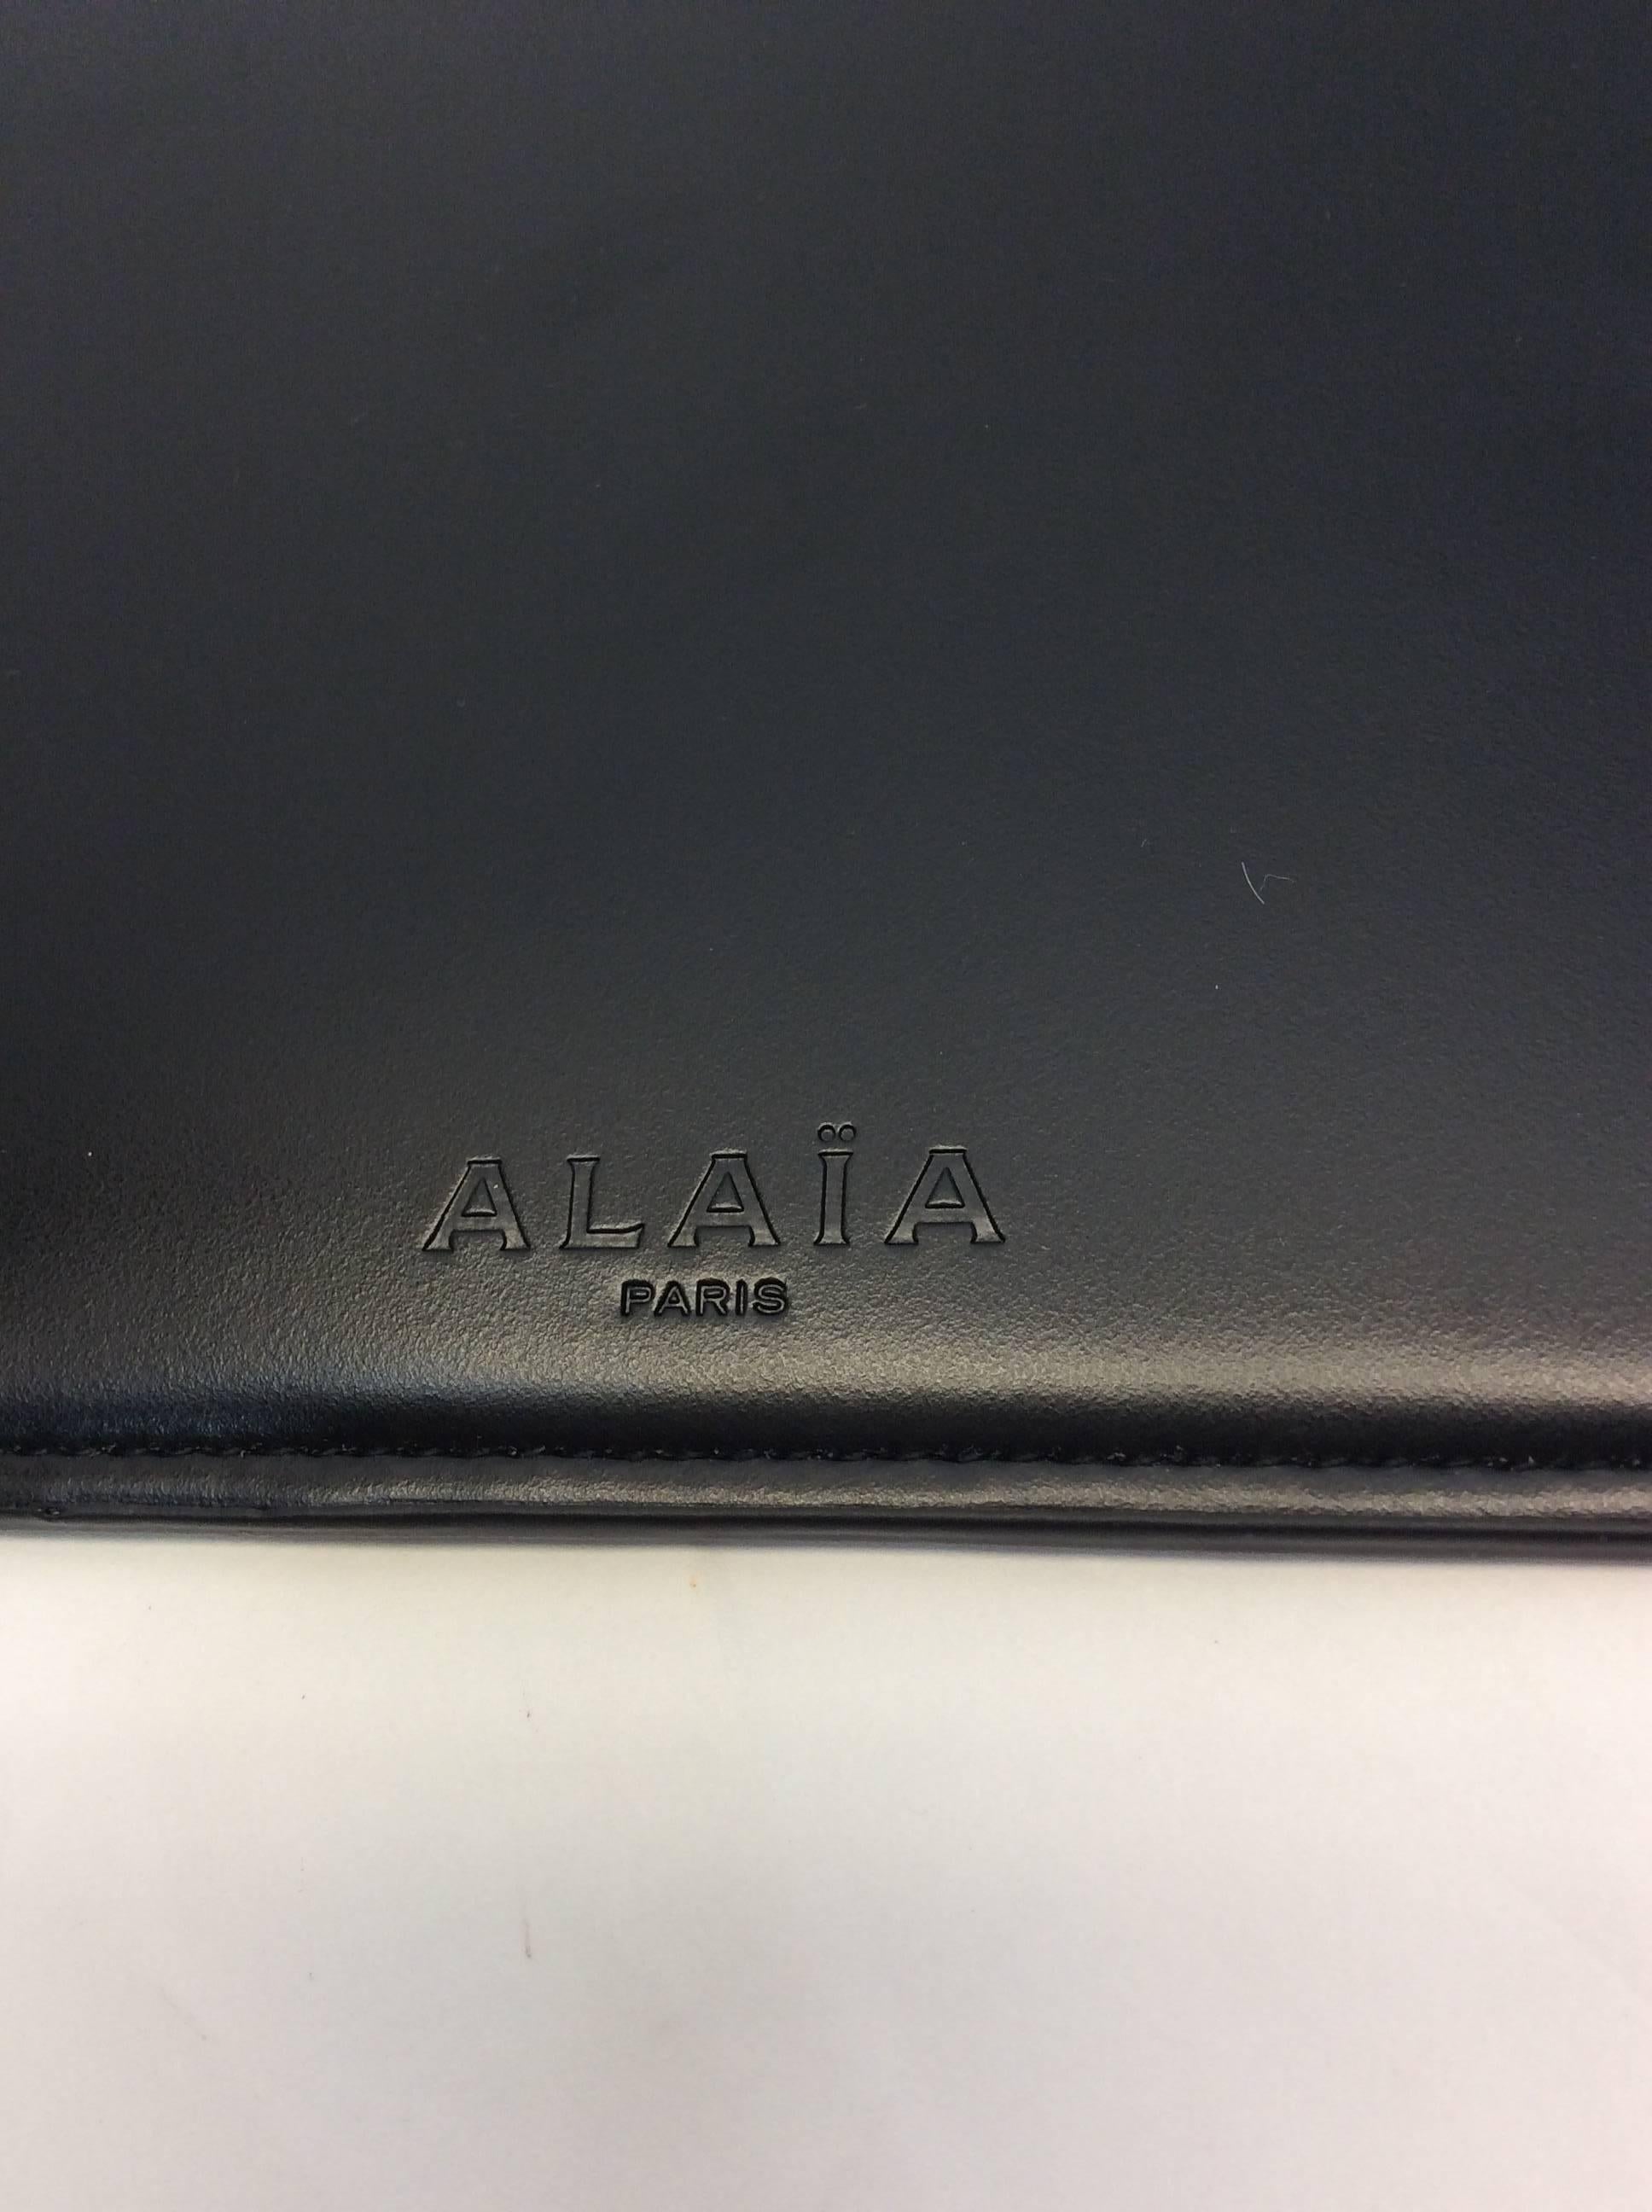 Black Leather Zip Pouch
8 inches long, 5.5 inches wide
Top zipper closure
Alaia logo zipper pull
Leather exterior and lining